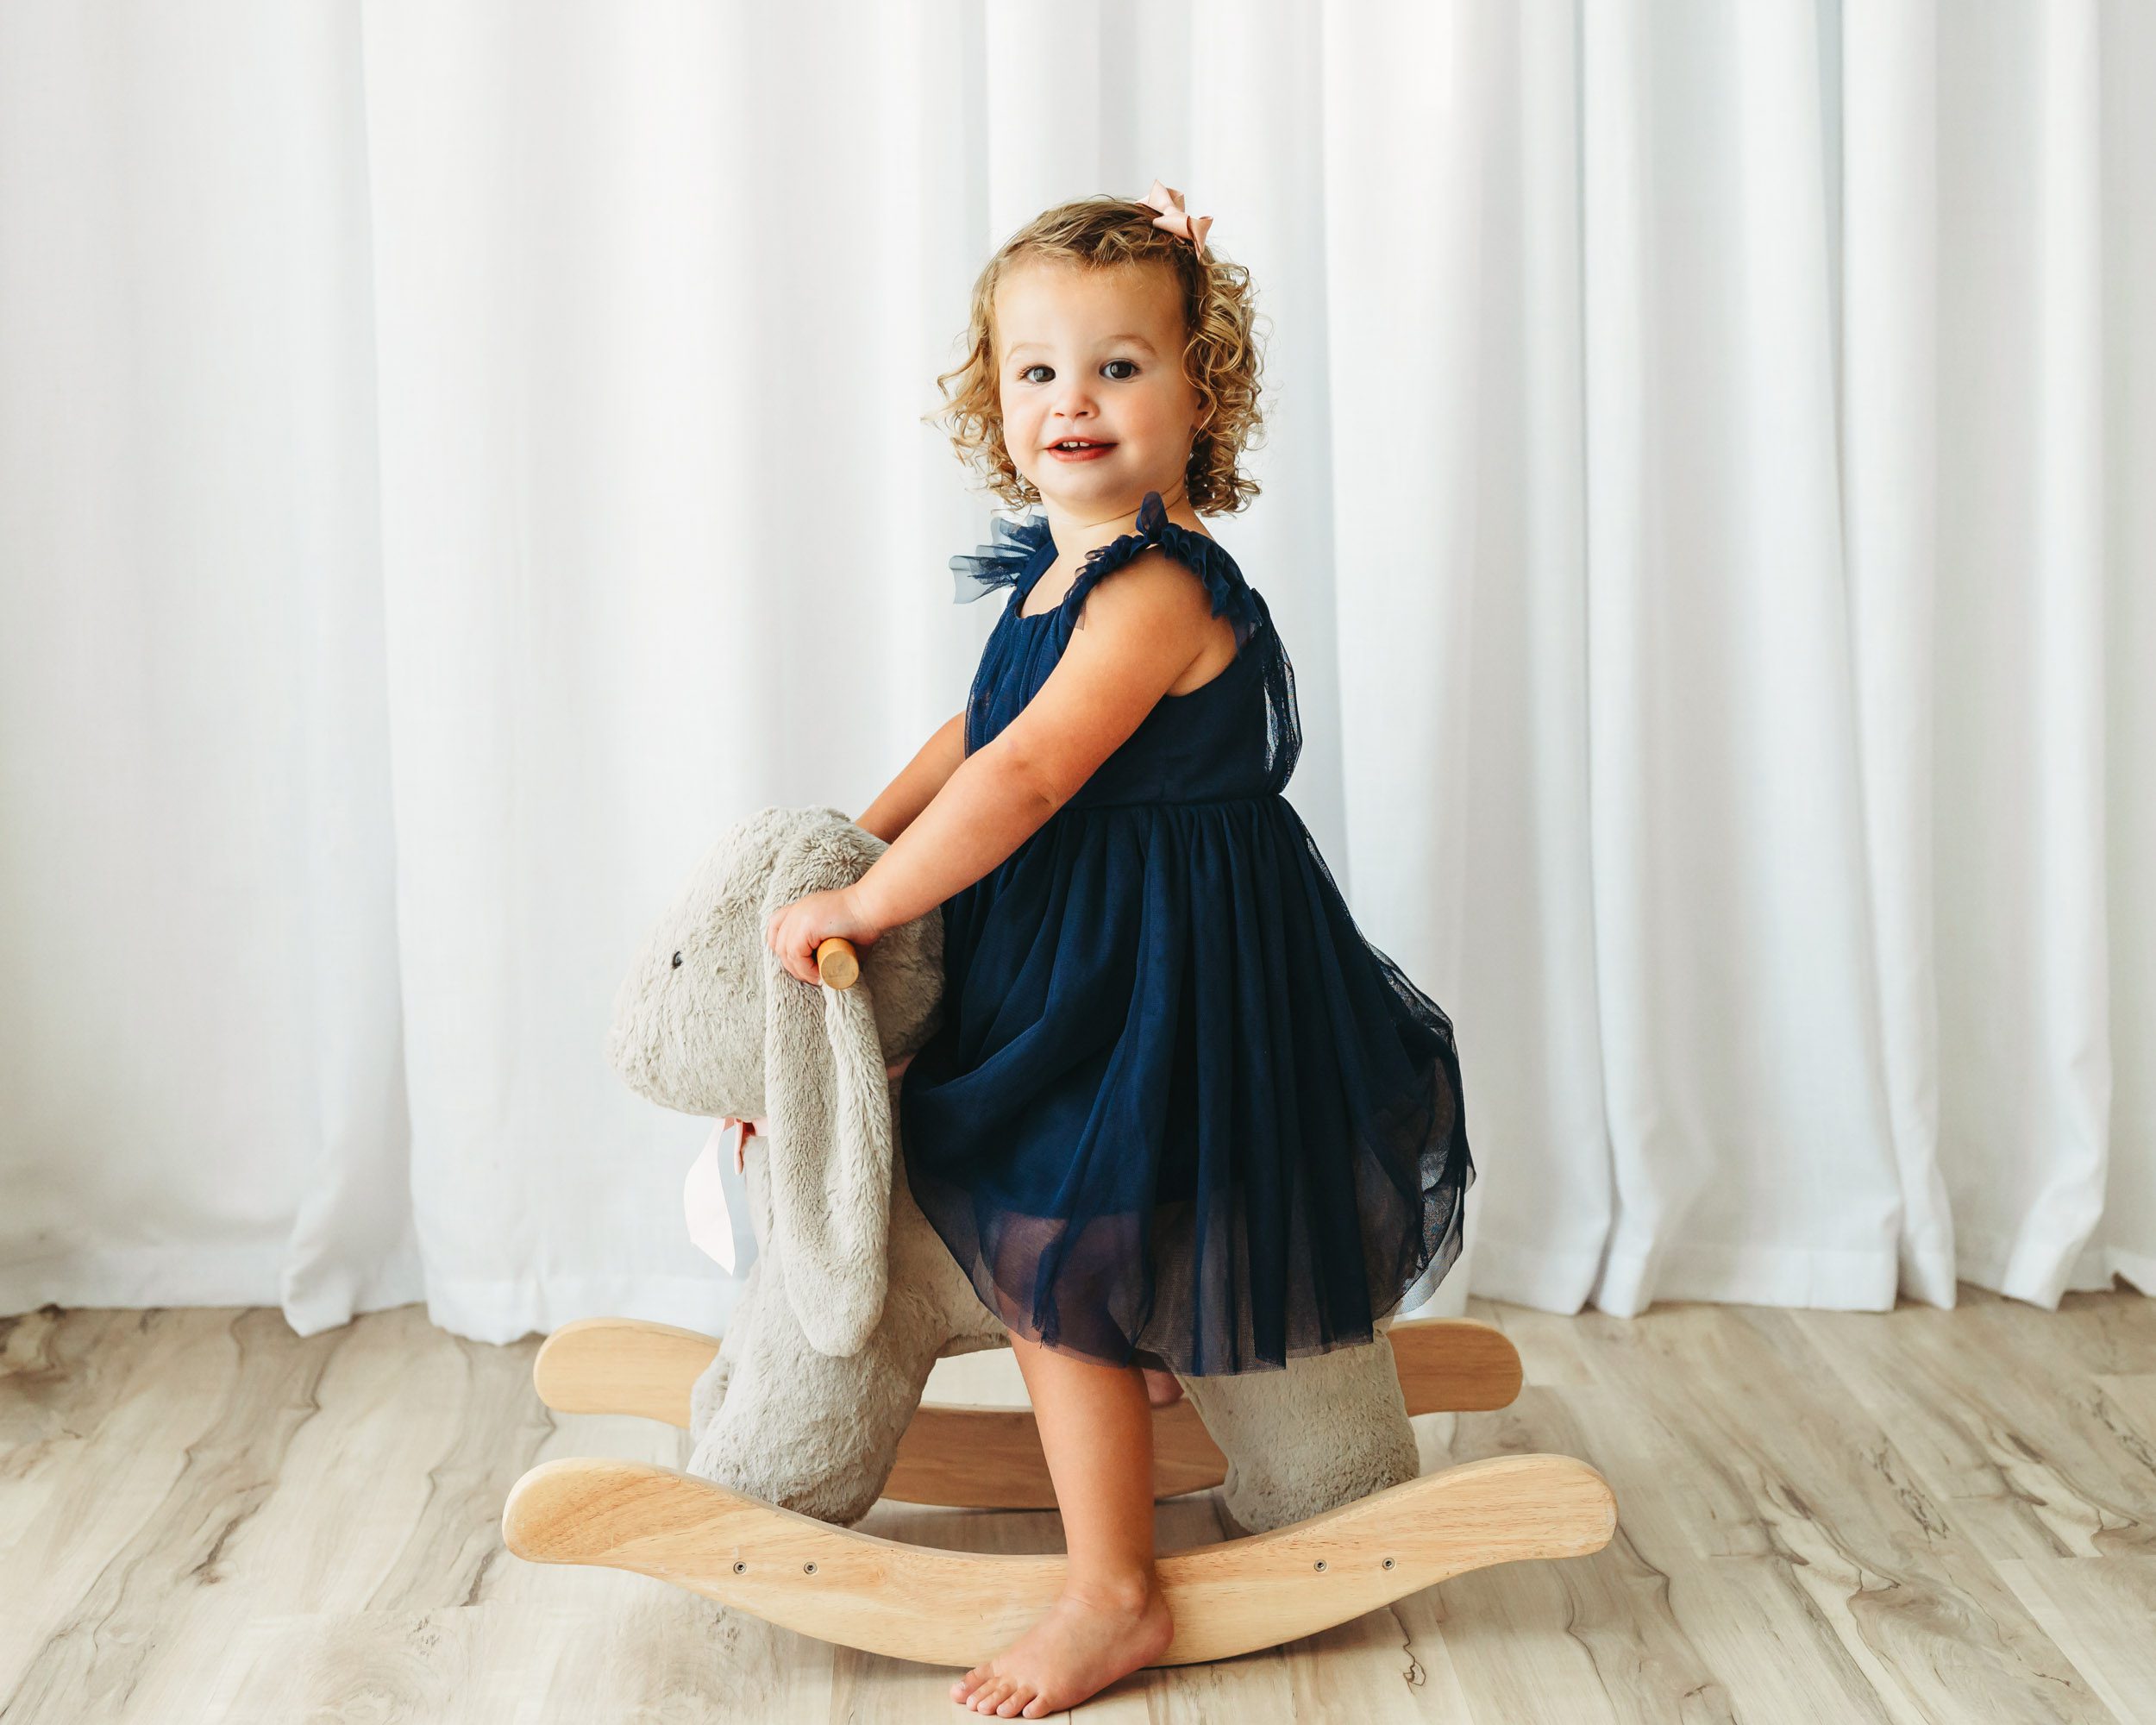 a little girl wearing a blue dress riding on a bunny rocker toy and smiling at the camera during a 2nd birthday photoshoot